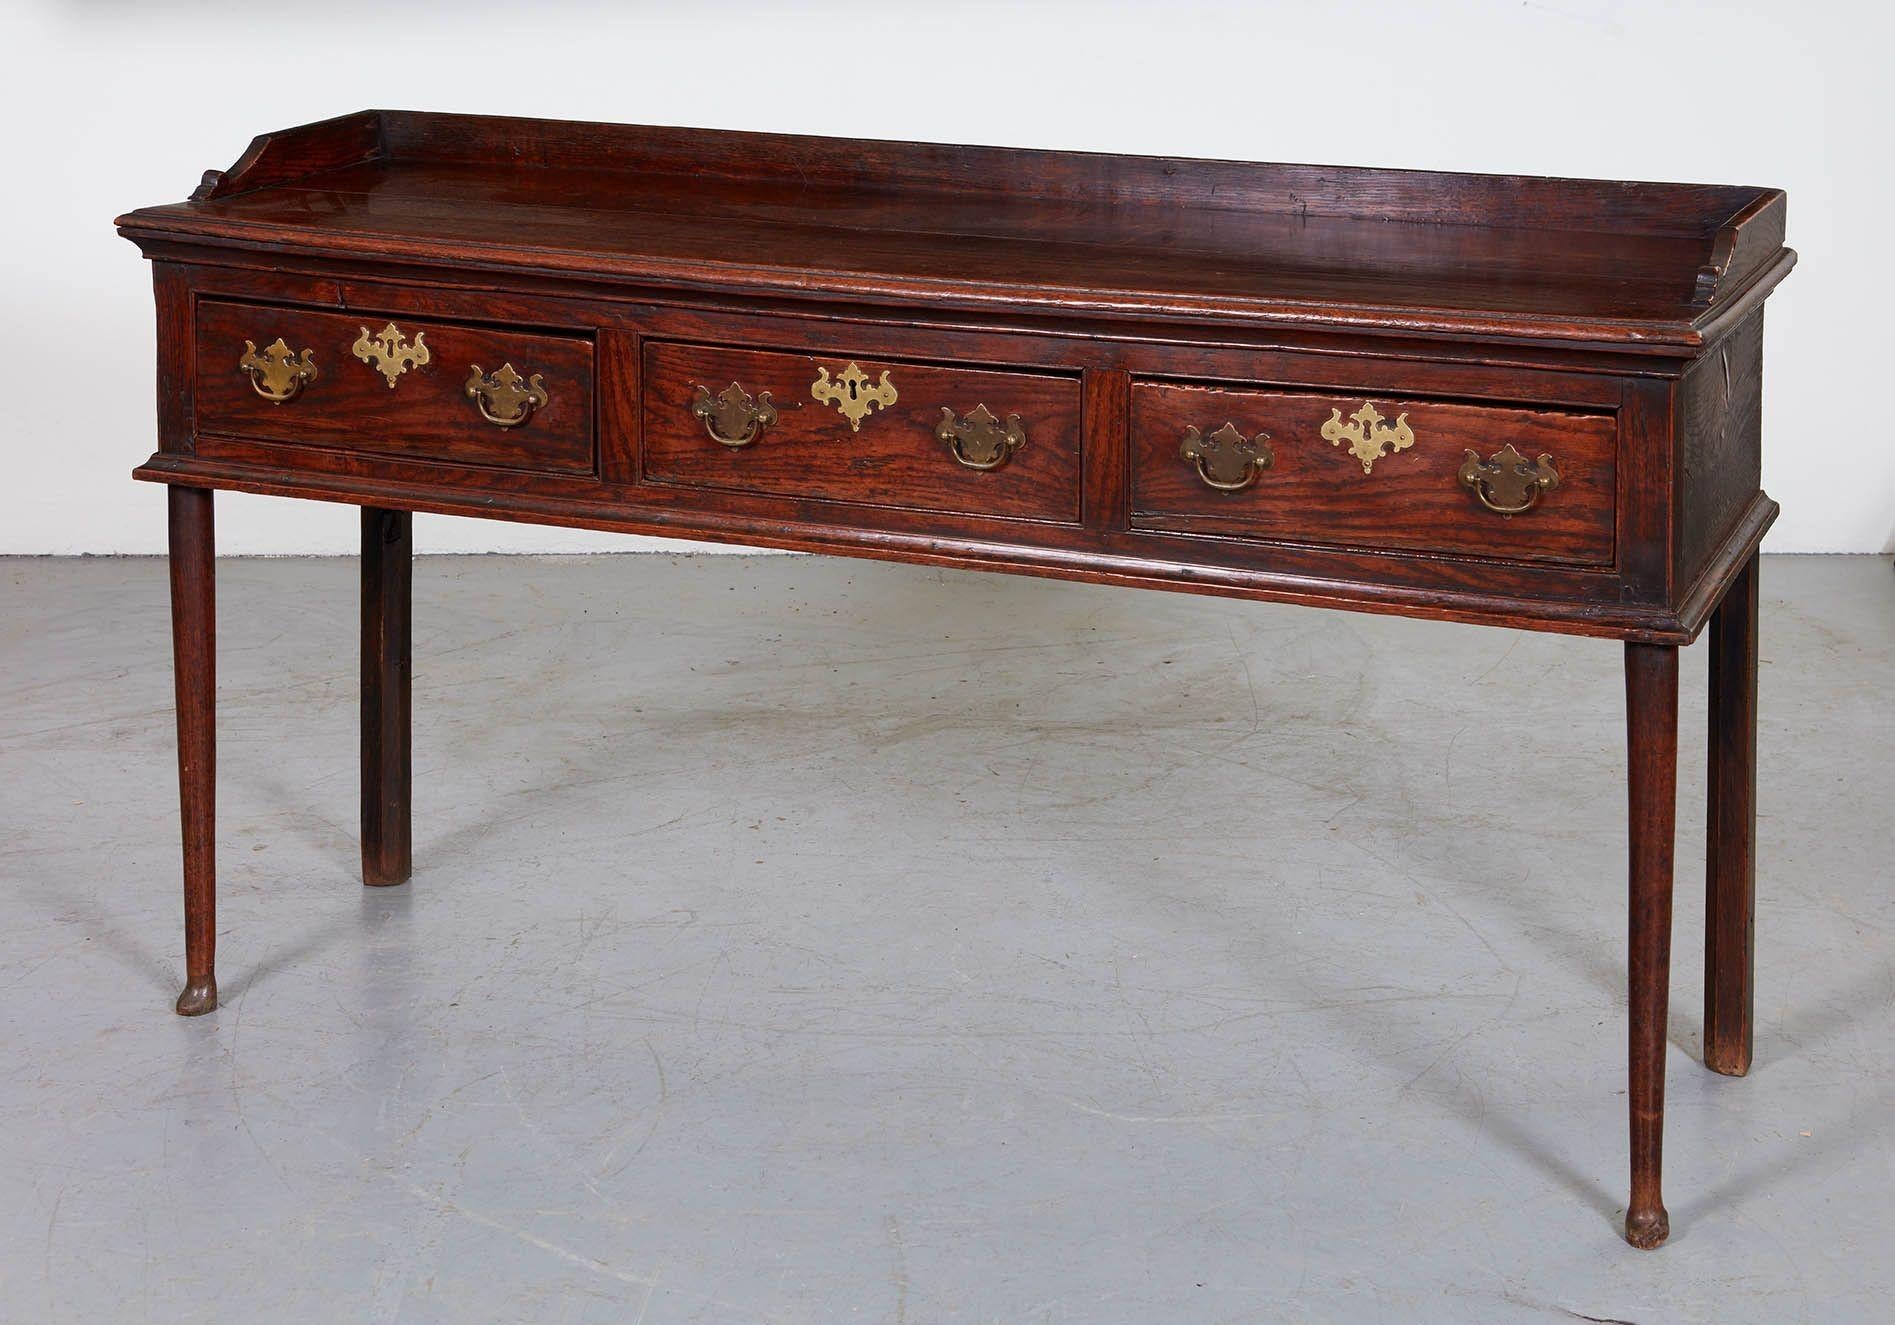 An elegant 18th century Welsh dresser having thin body of three drawers over slim legs, the front legs turned, tapered and ending in pad feet, having two plank top with backsplash molding, and ogee molding to top and bottom of drawers.